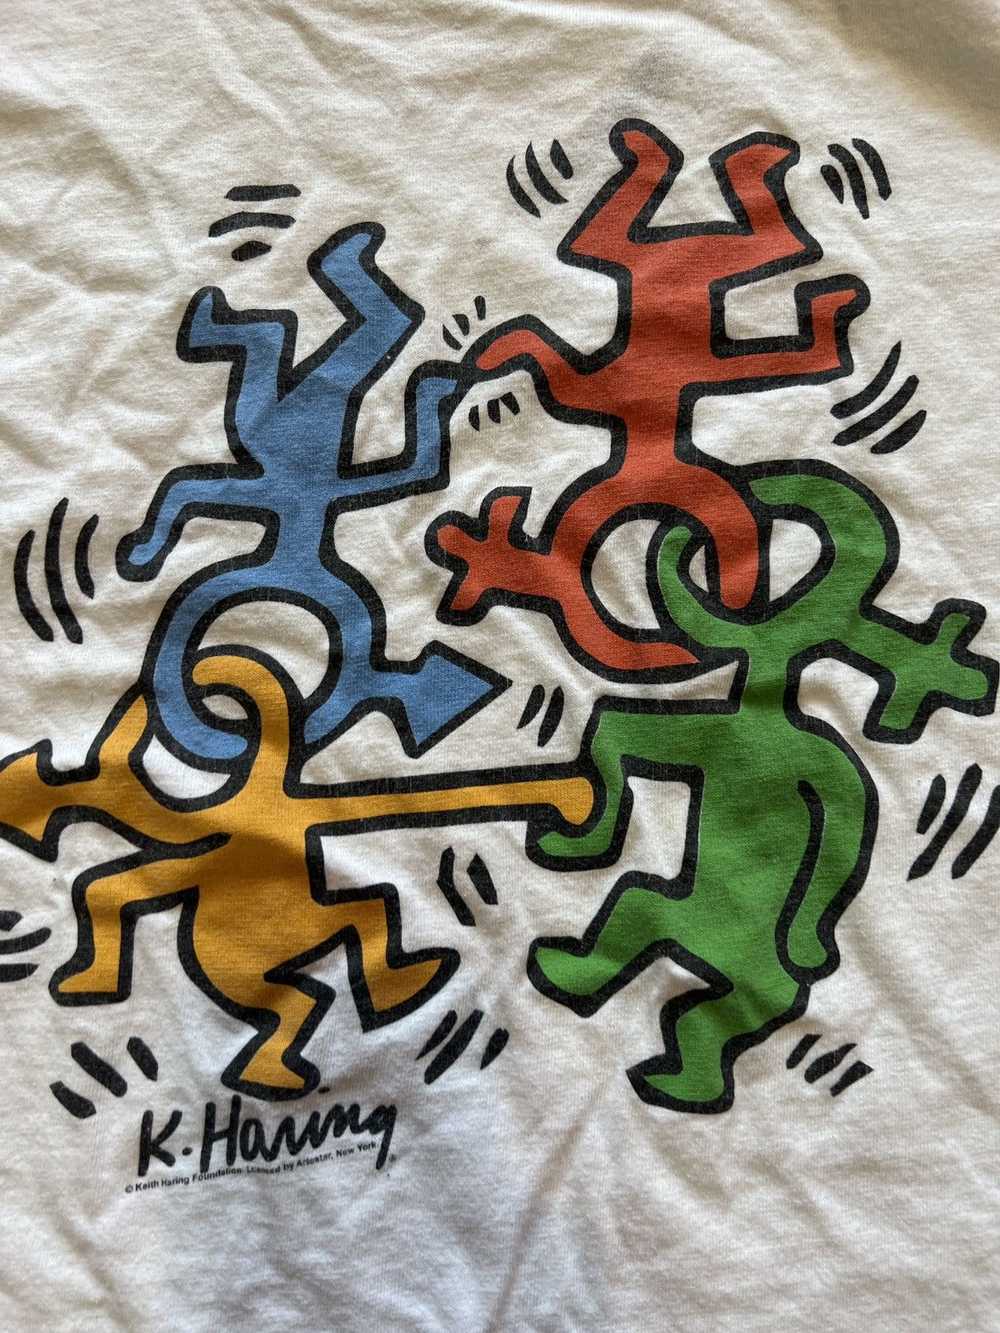 Keith Haring × Vintage Keith Haring graphic tee - image 2